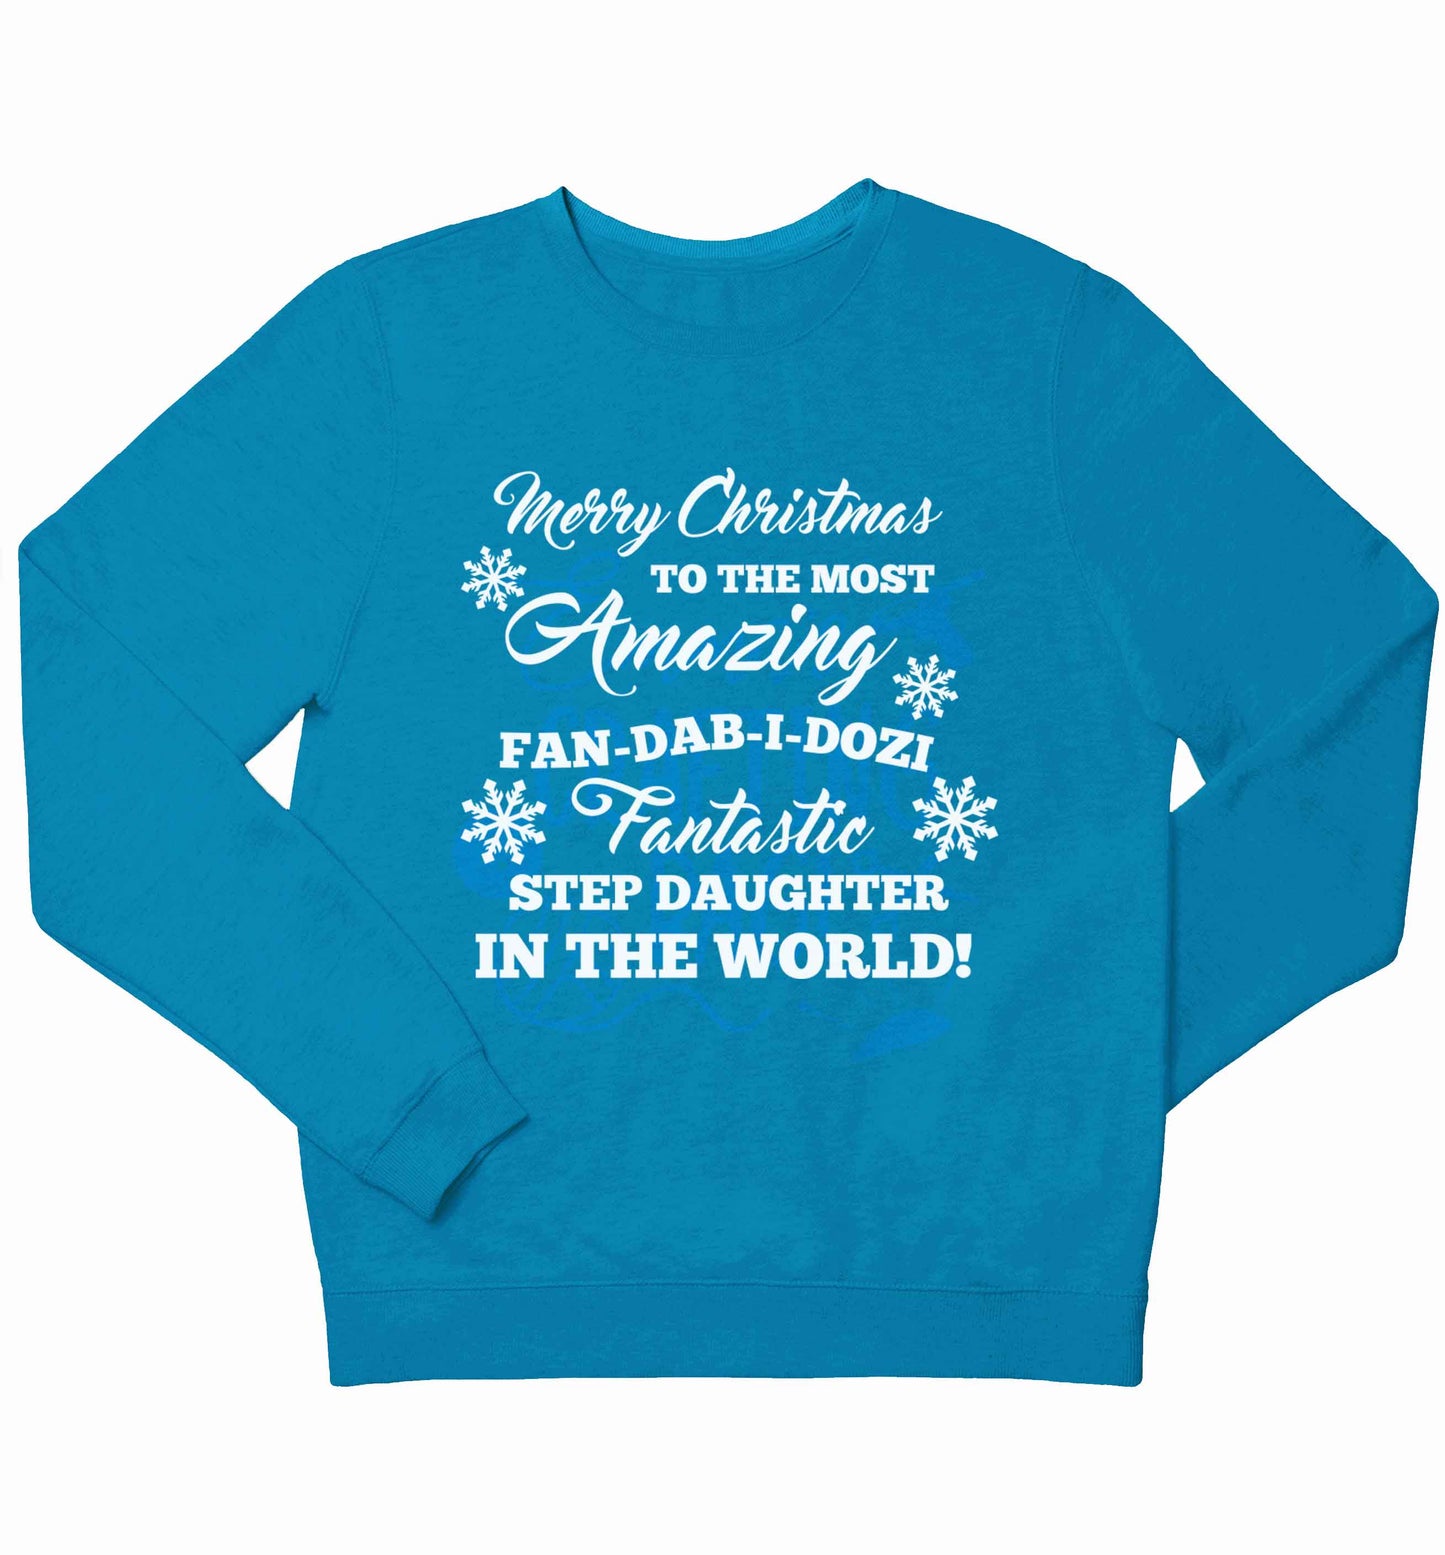 Merry Christmas to the most amazing fan-dab-i-dozi fantasic Step Daughter in the world children's blue sweater 12-13 Years